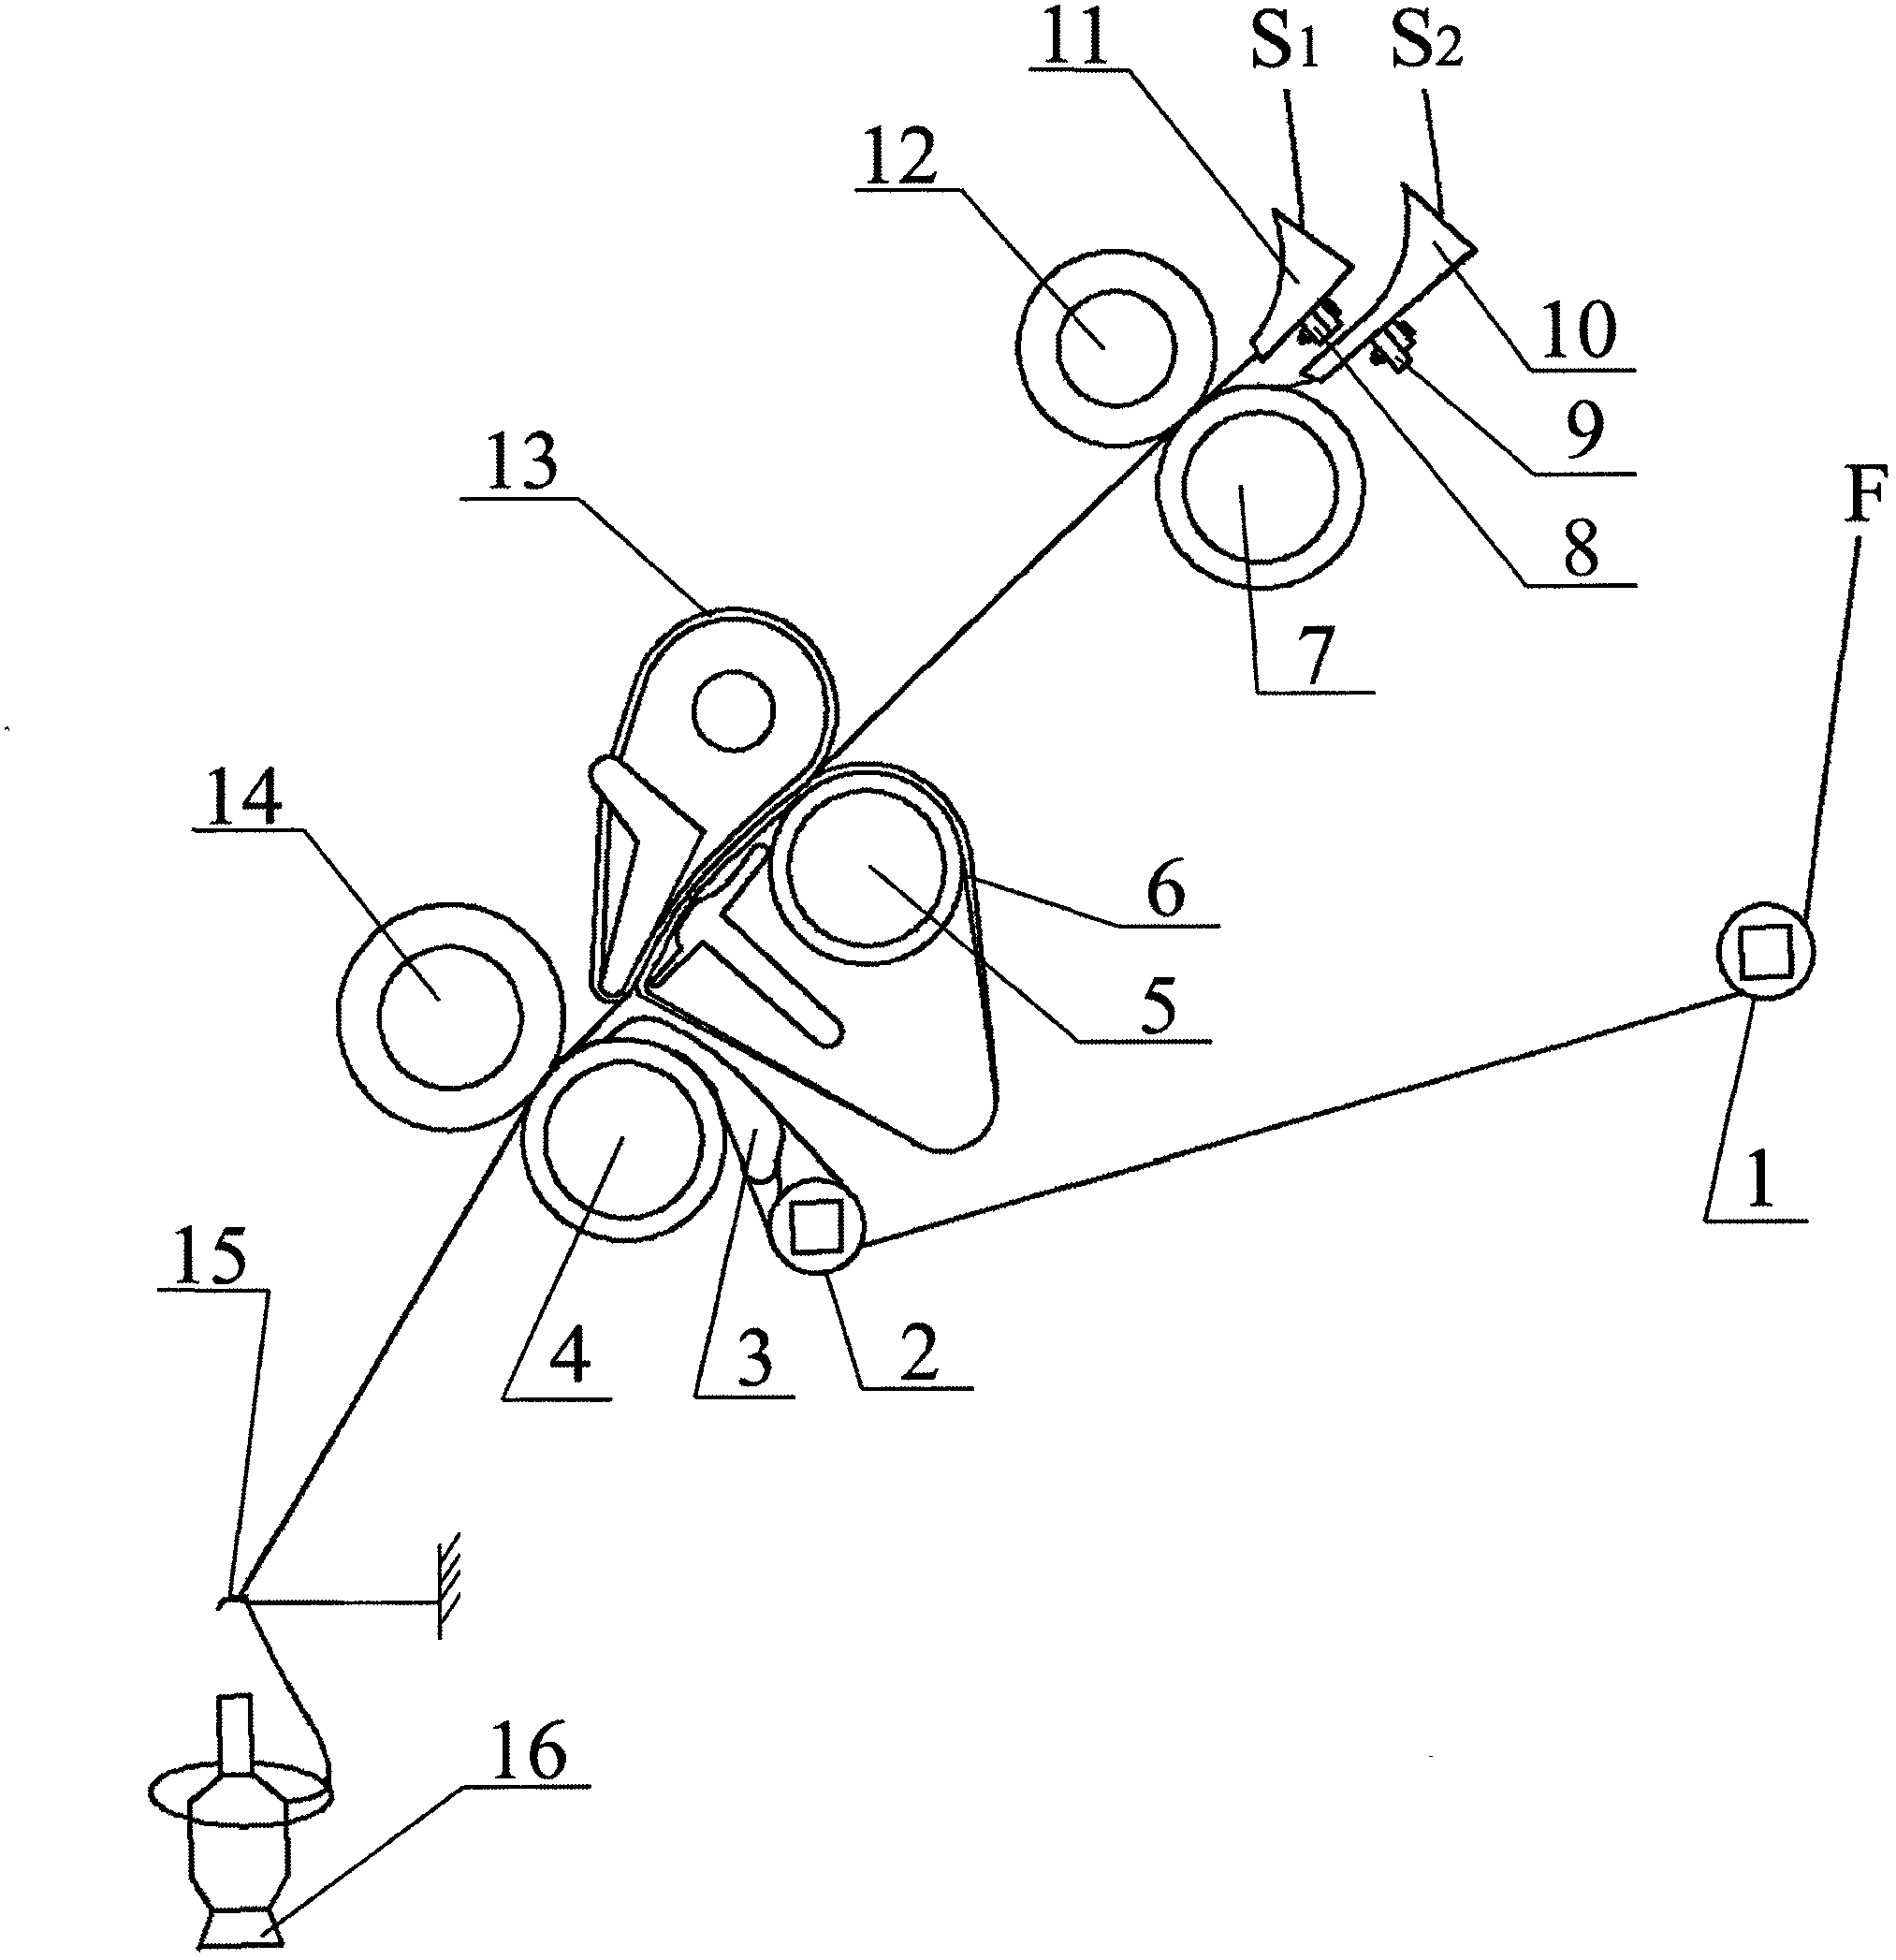 Forced internal and external transfer type composite ring spinning method for filament